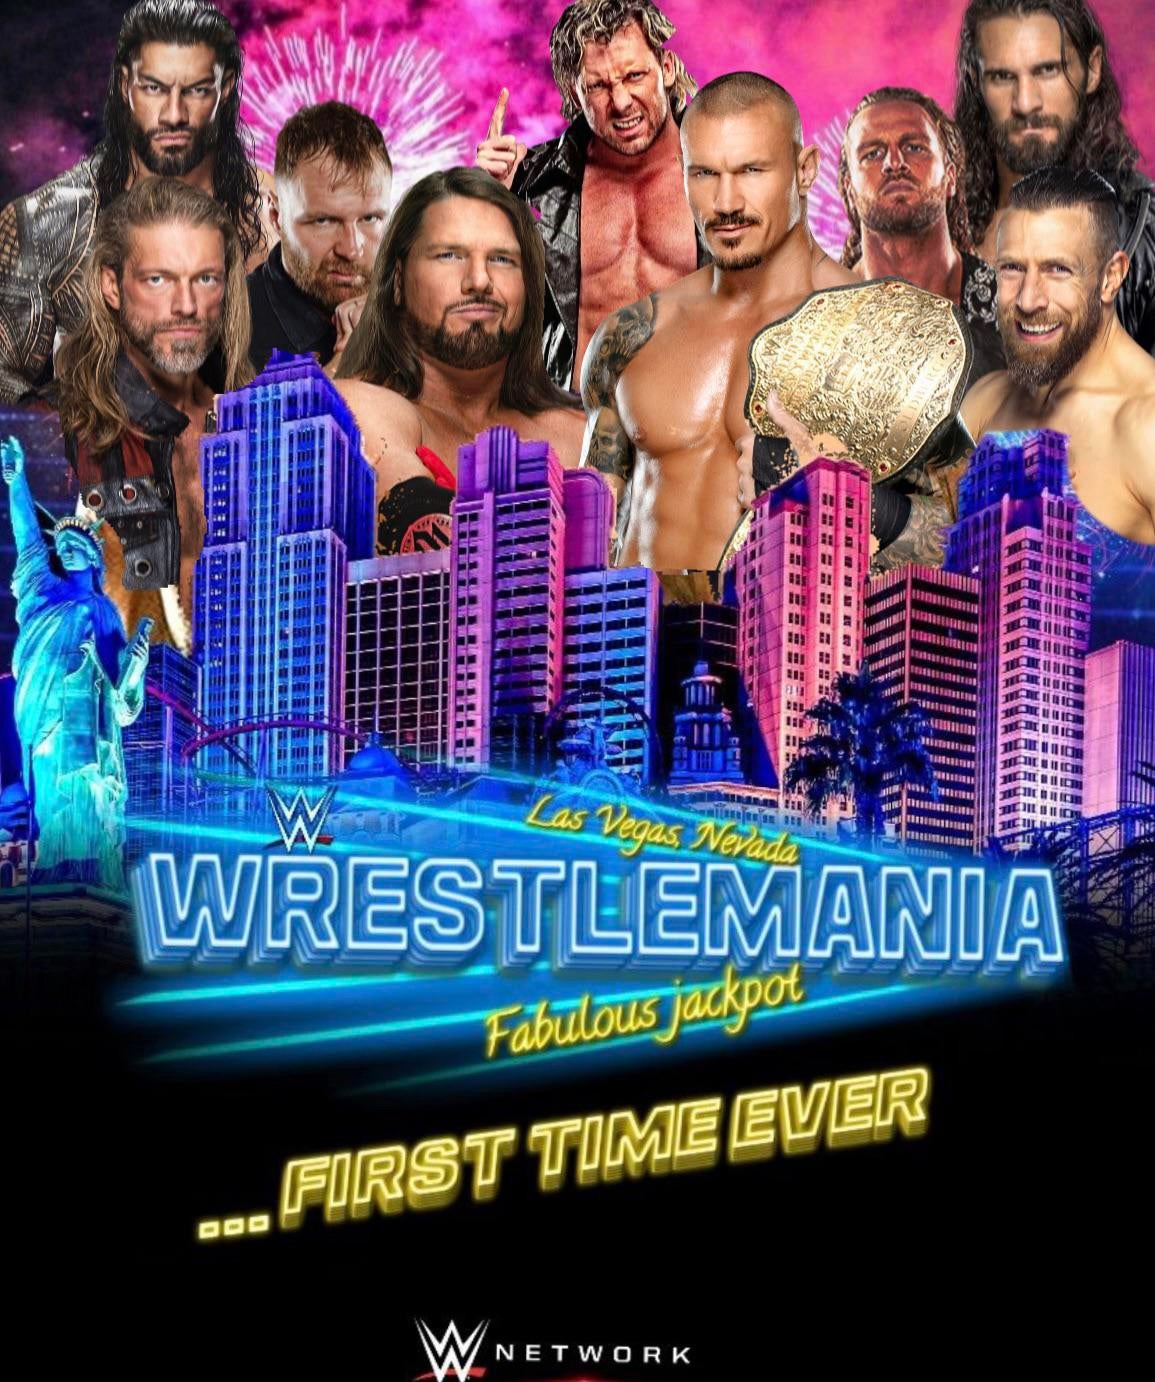 MCM Made a Wrestlemania wallpaper based on my Universe Mode. Randy Orton vs Adam Page will be headlining the show